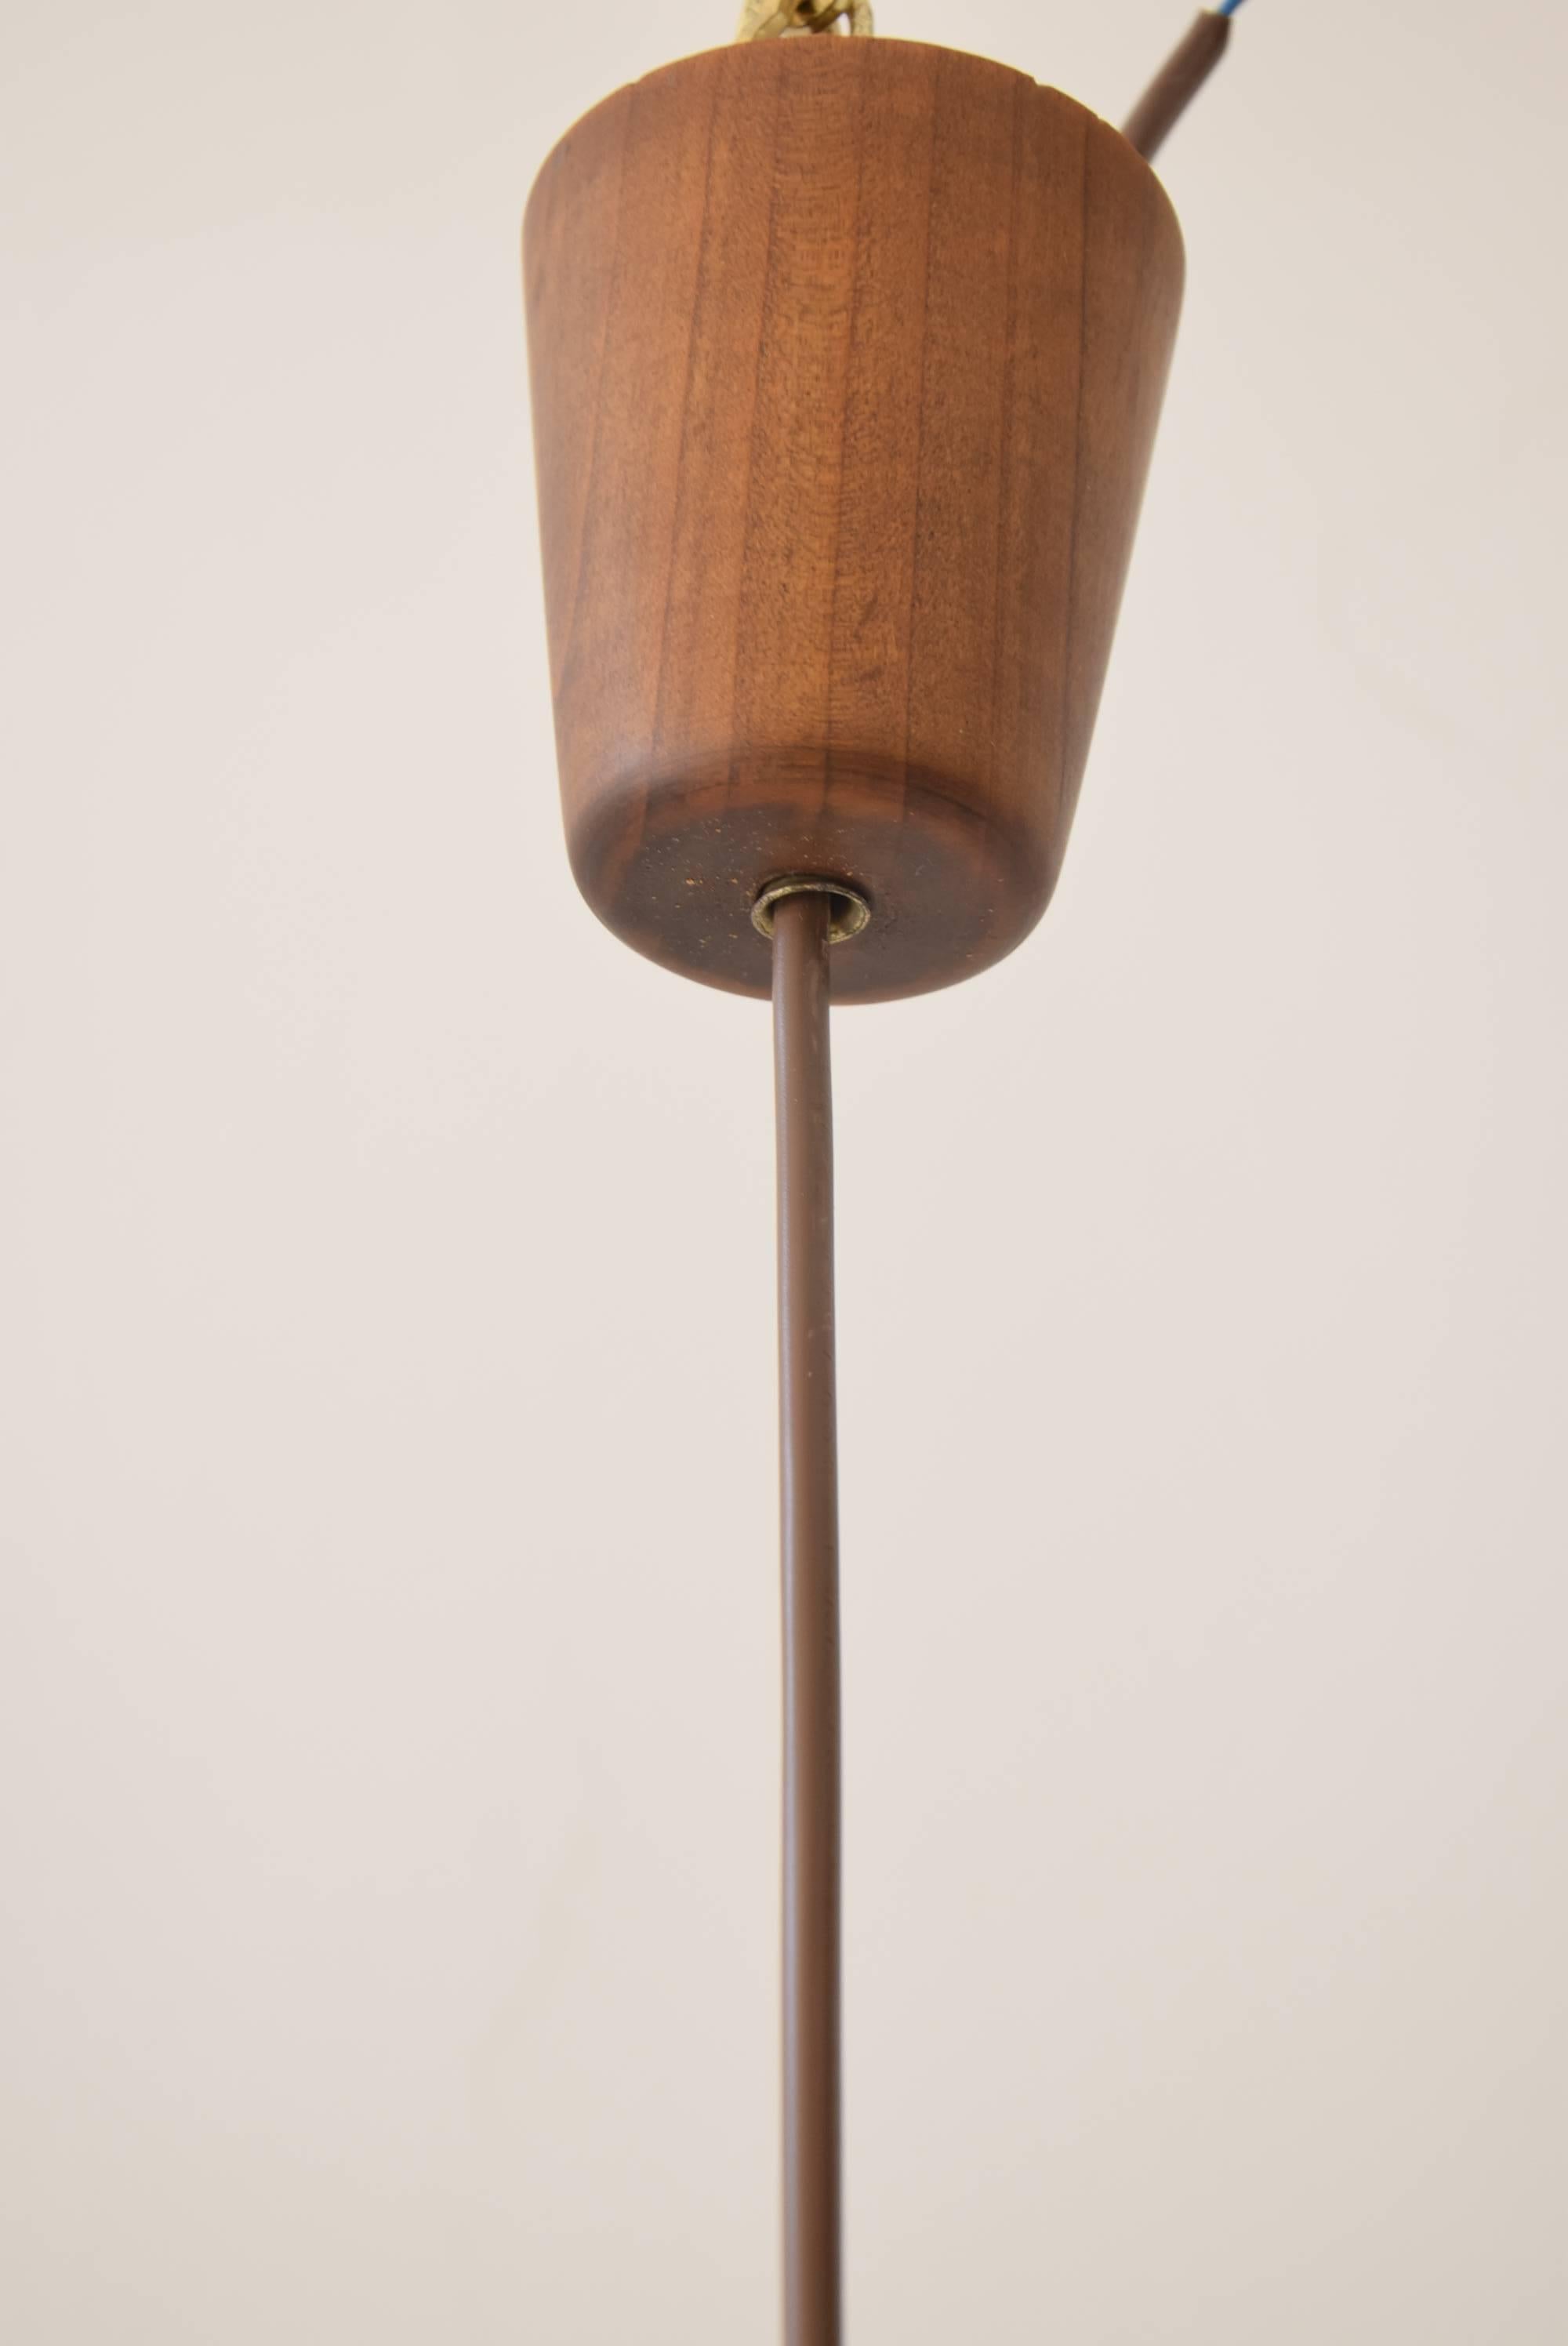 Lacquered Elegant Hanging Lamp of Copper and Teak Wood, circa 1960s